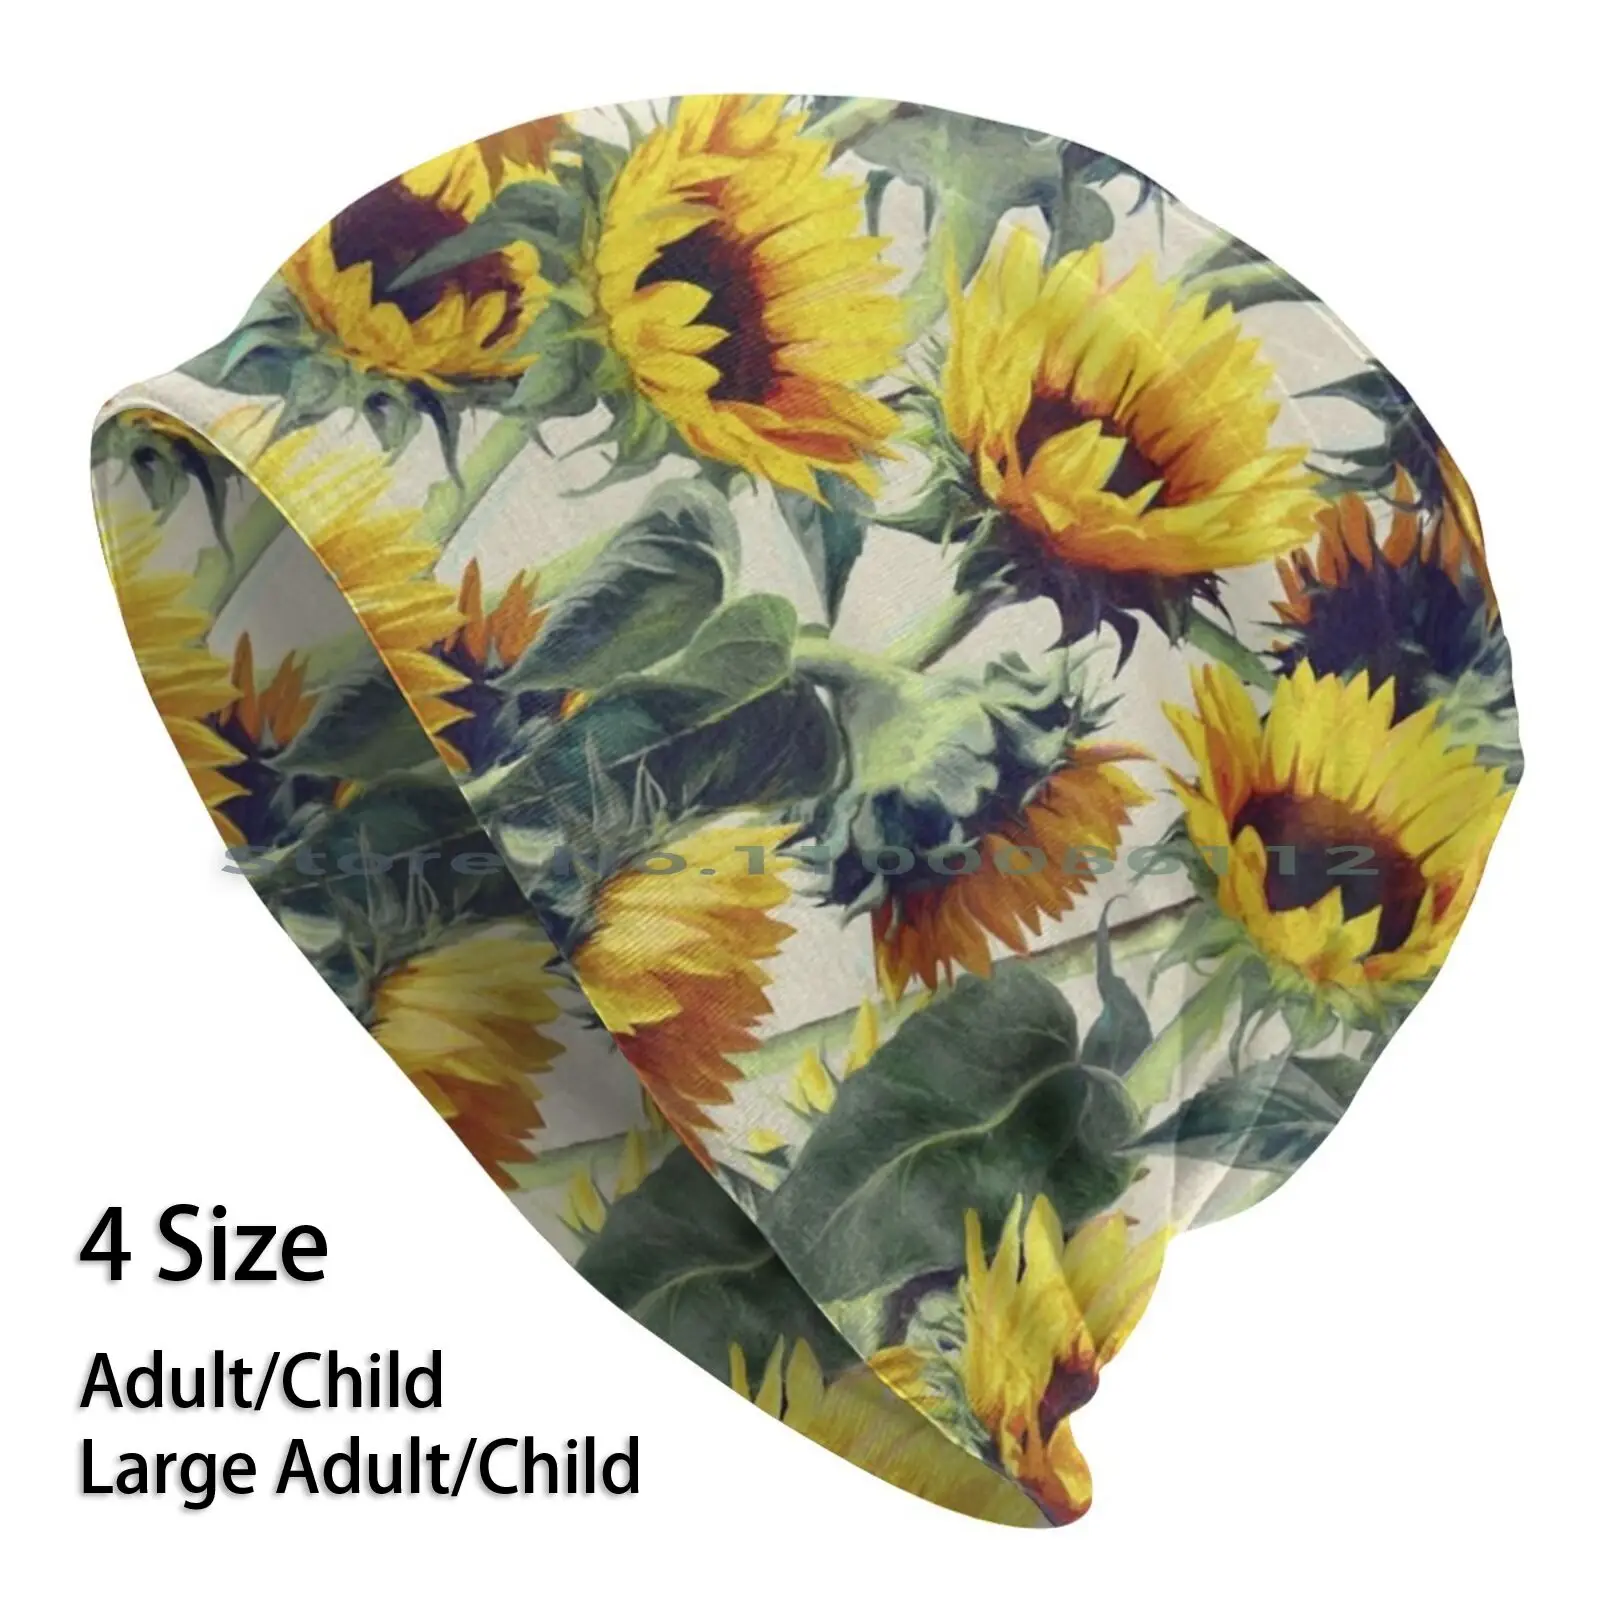 

Sunflowers Forever Beanies Knit Hat Sunflowers Floral Pattern Painted Yellow Olive Green Cream Grey Bright Happy Cheerful Home